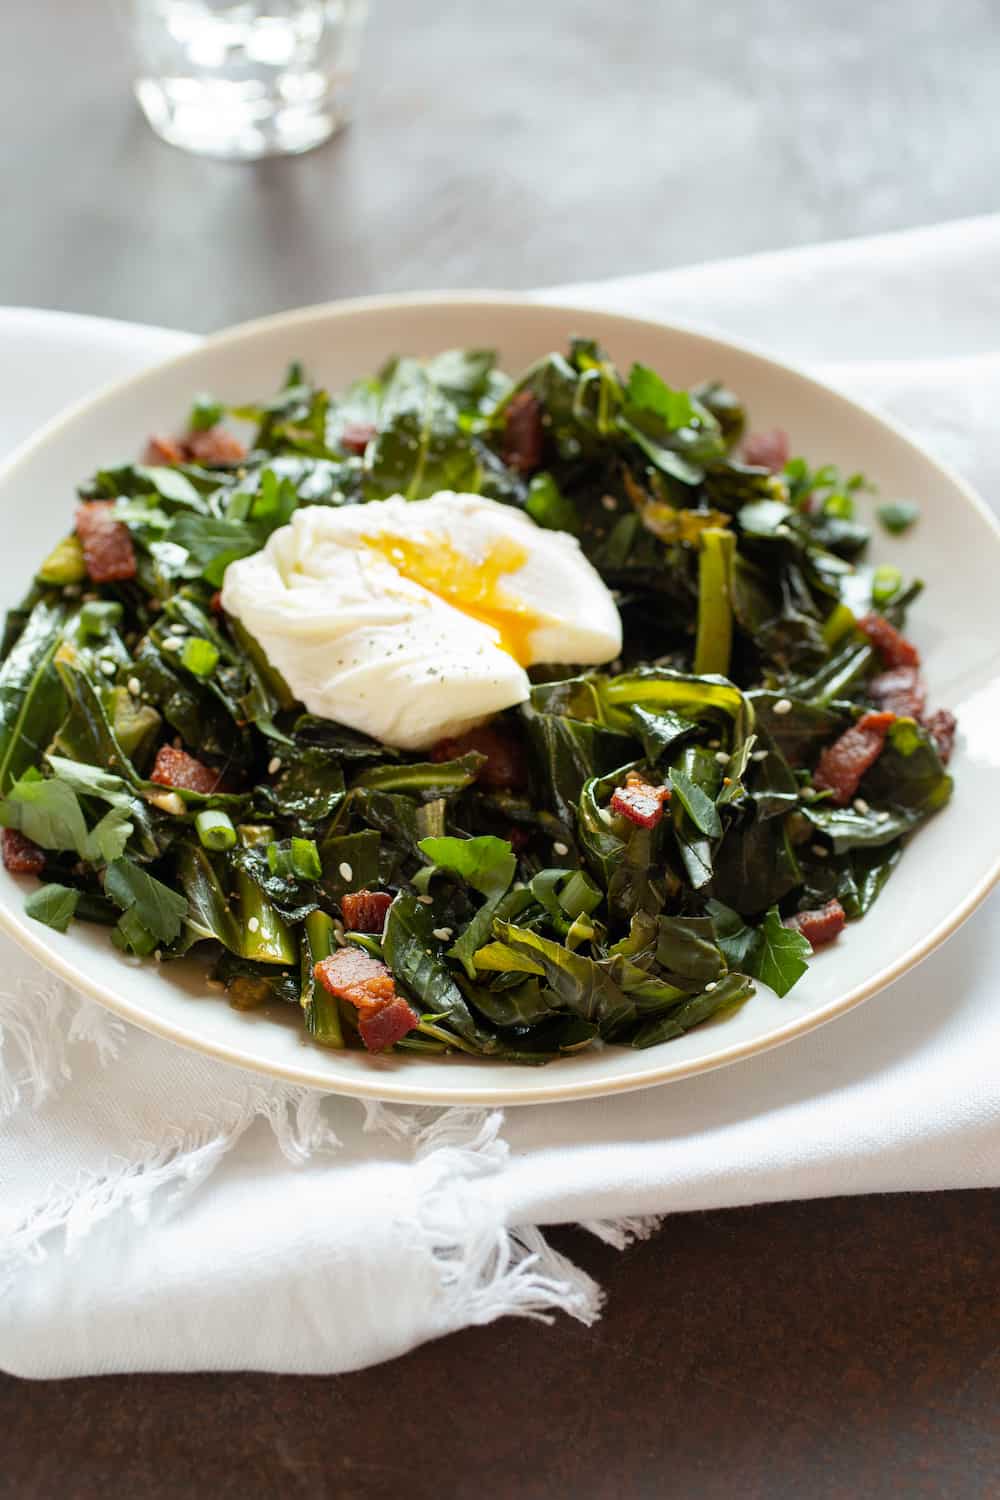 Spiced Collard Greens with Bacon and Eggs